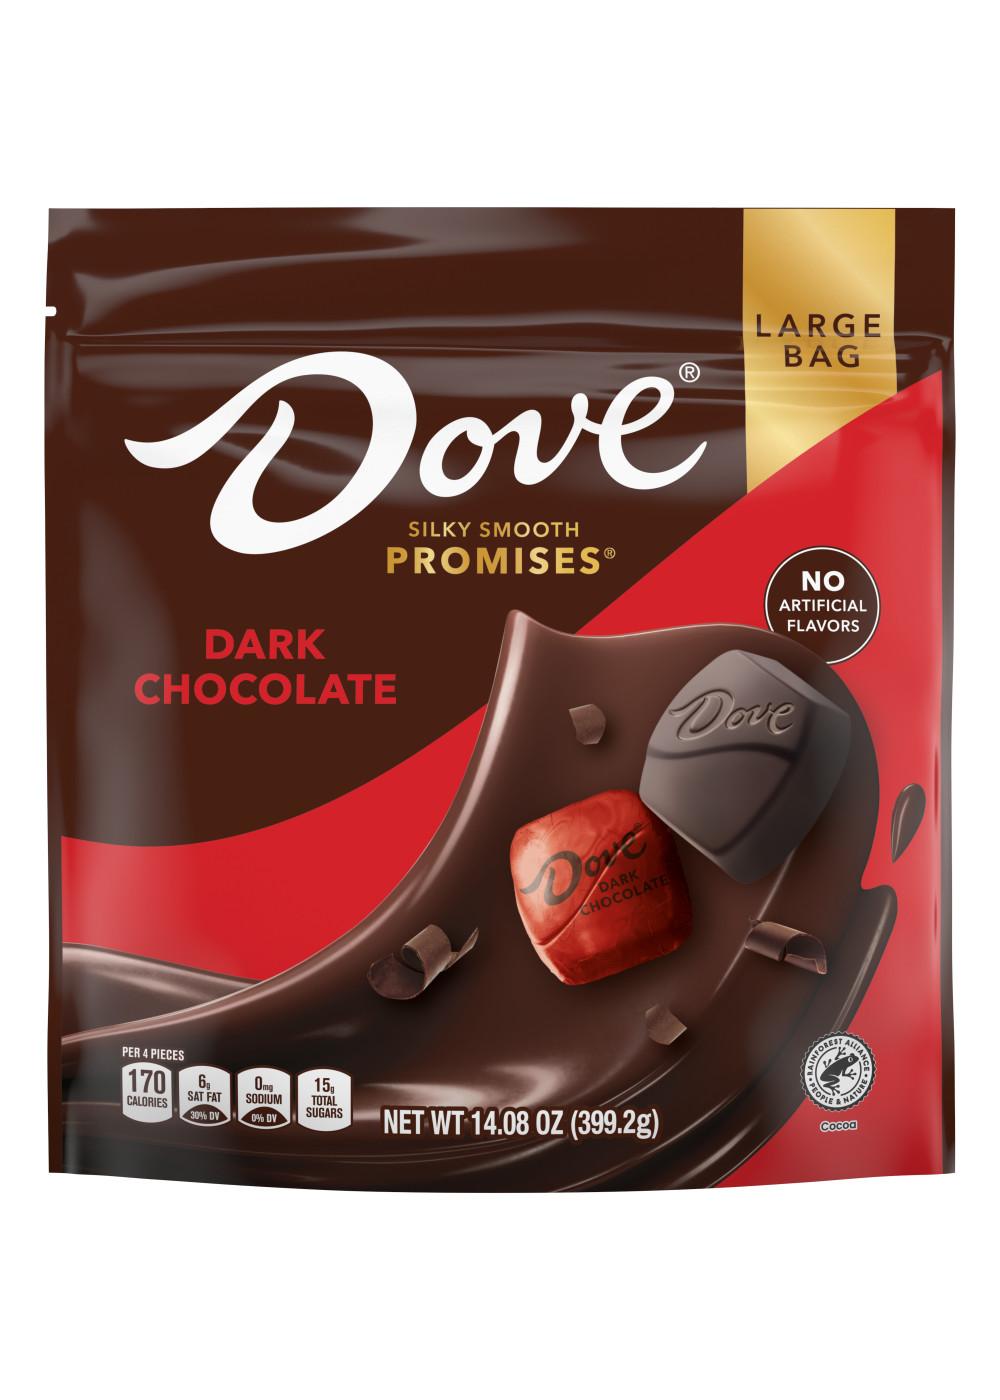 Dove Promises Dark Chocolate Candy - Large Bag; image 1 of 7